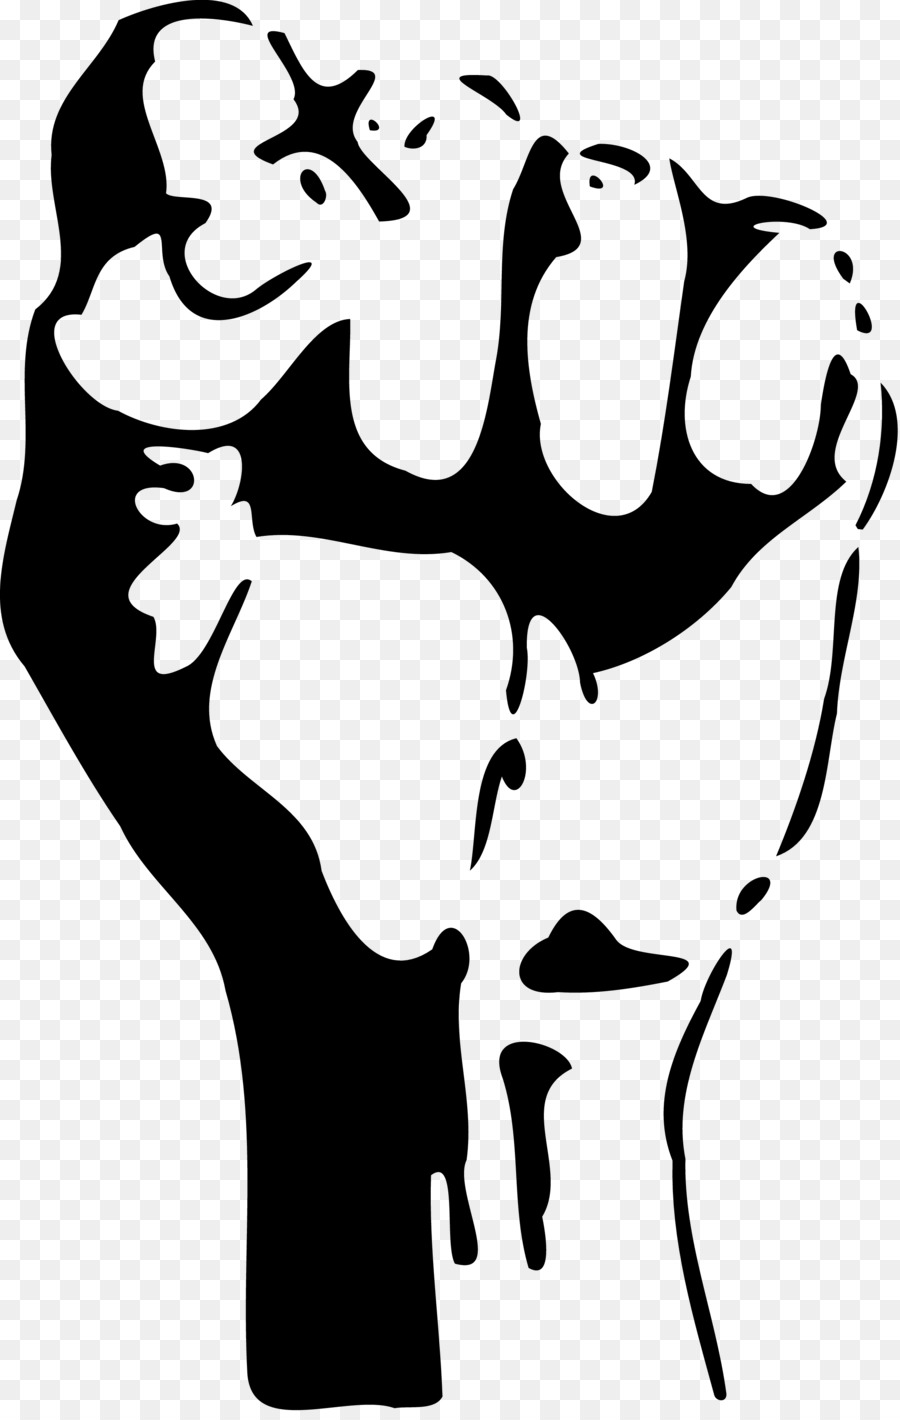 Raised fist Clip art - fight png download - 2267*3557 - Free Transparent  png Download.